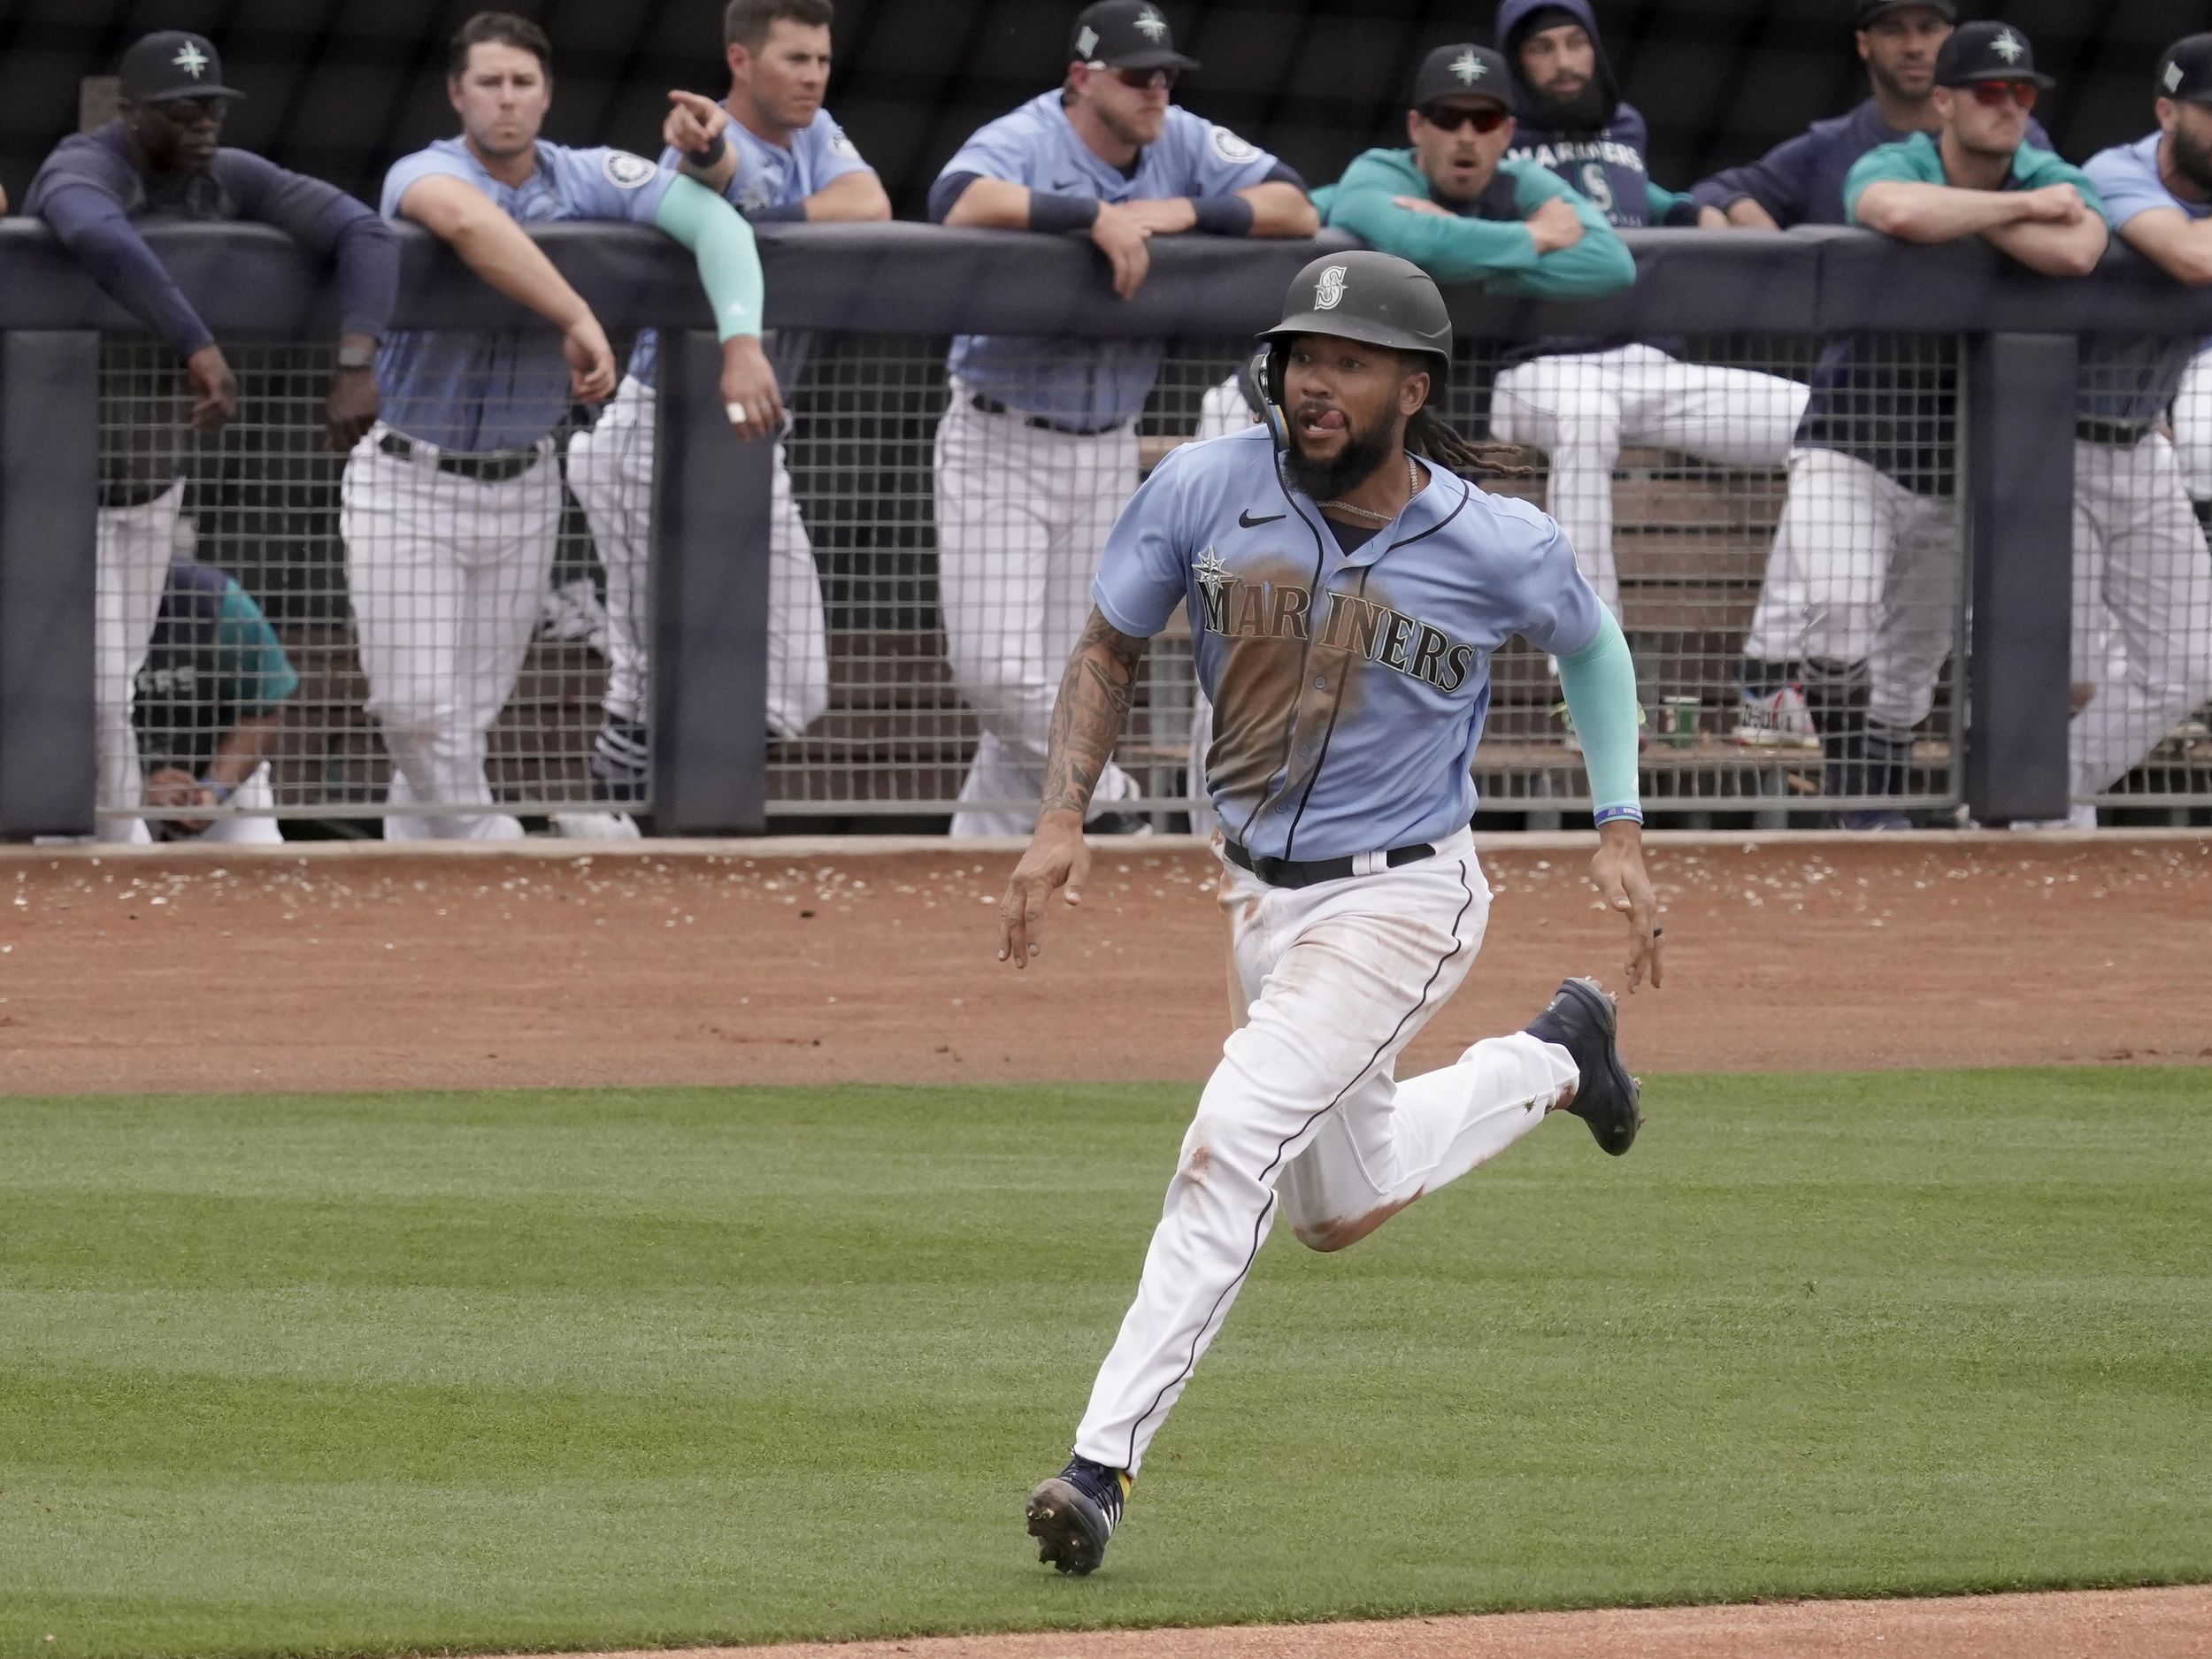 Mariners sign shortstop J.P. Crawford to 5-year contract extension, Mariners